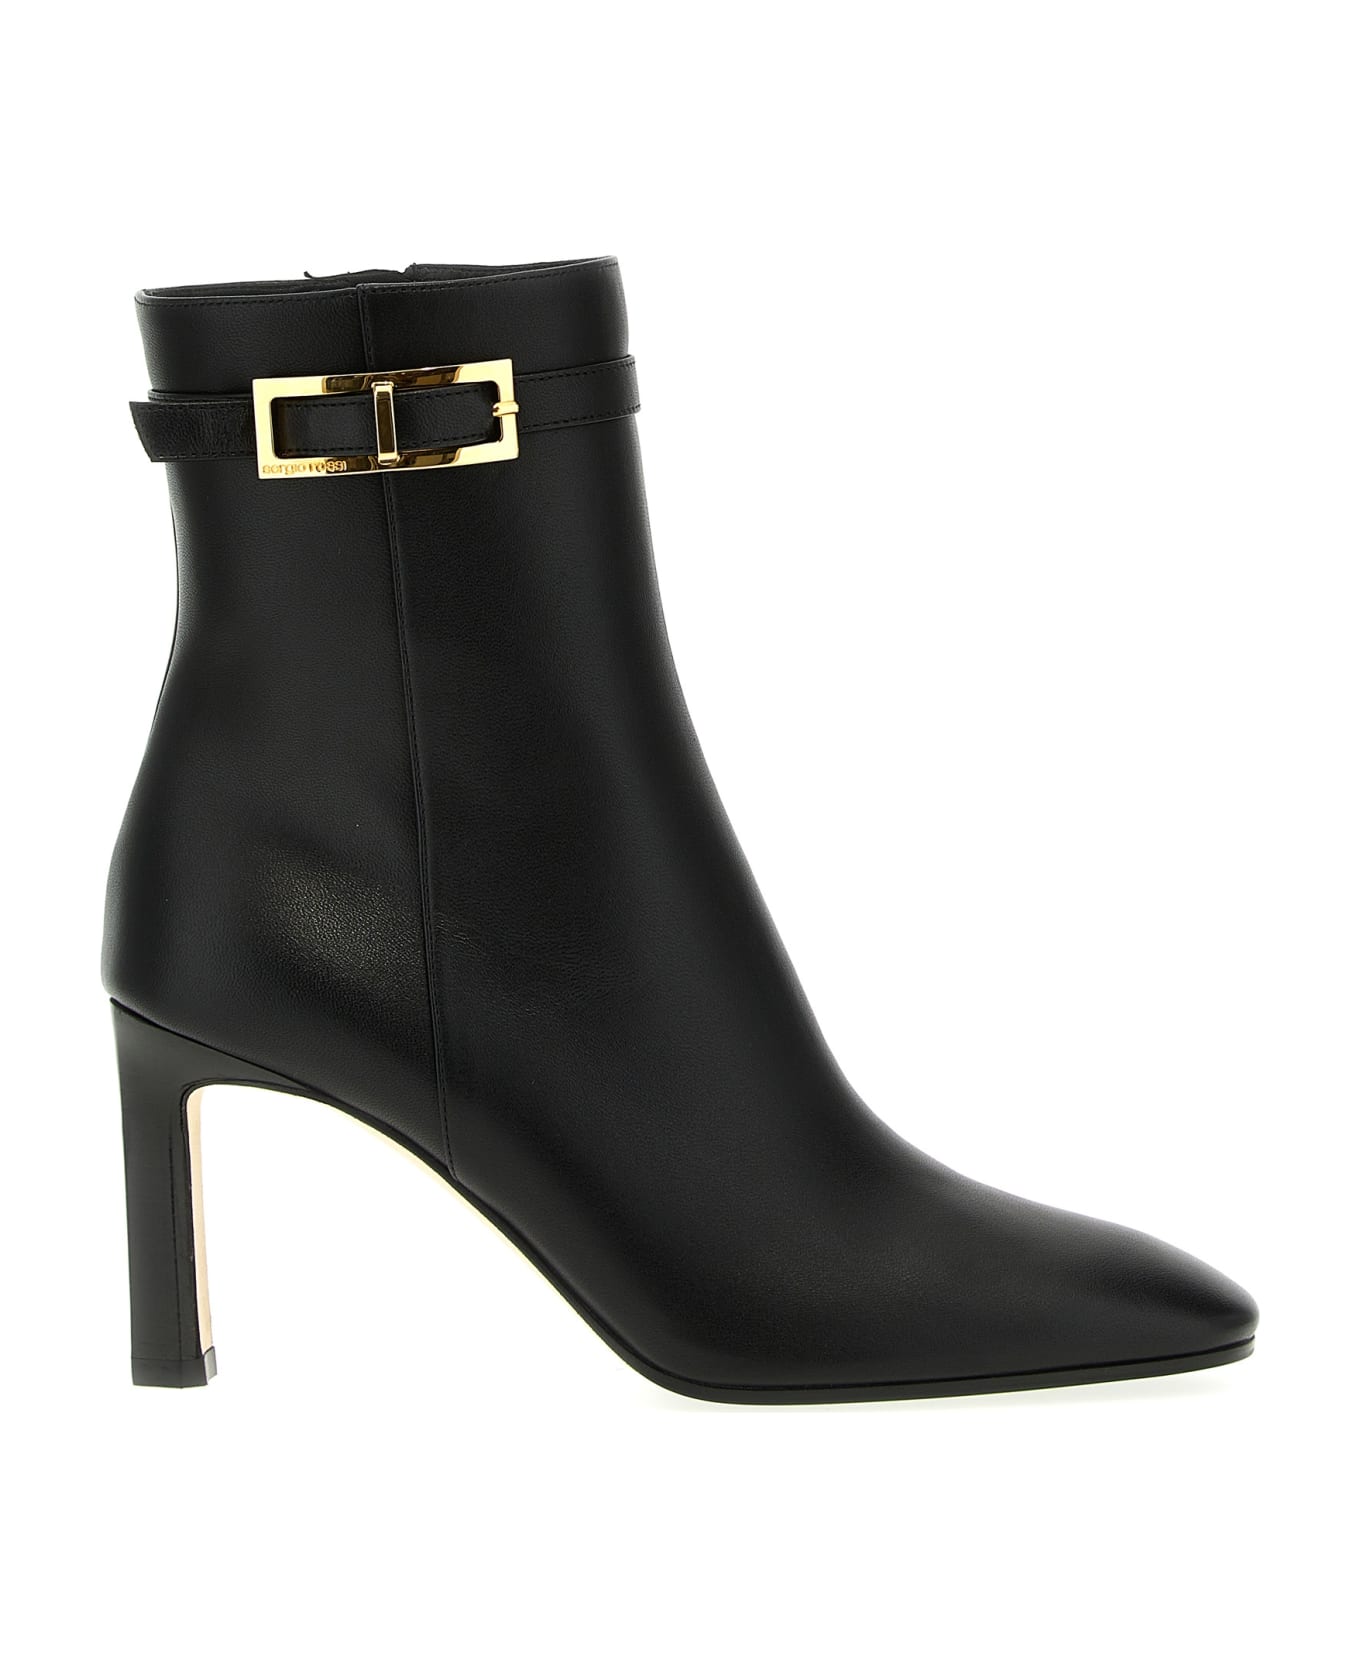 Sergio Rossi 'nora' Ankle Boots - Black  